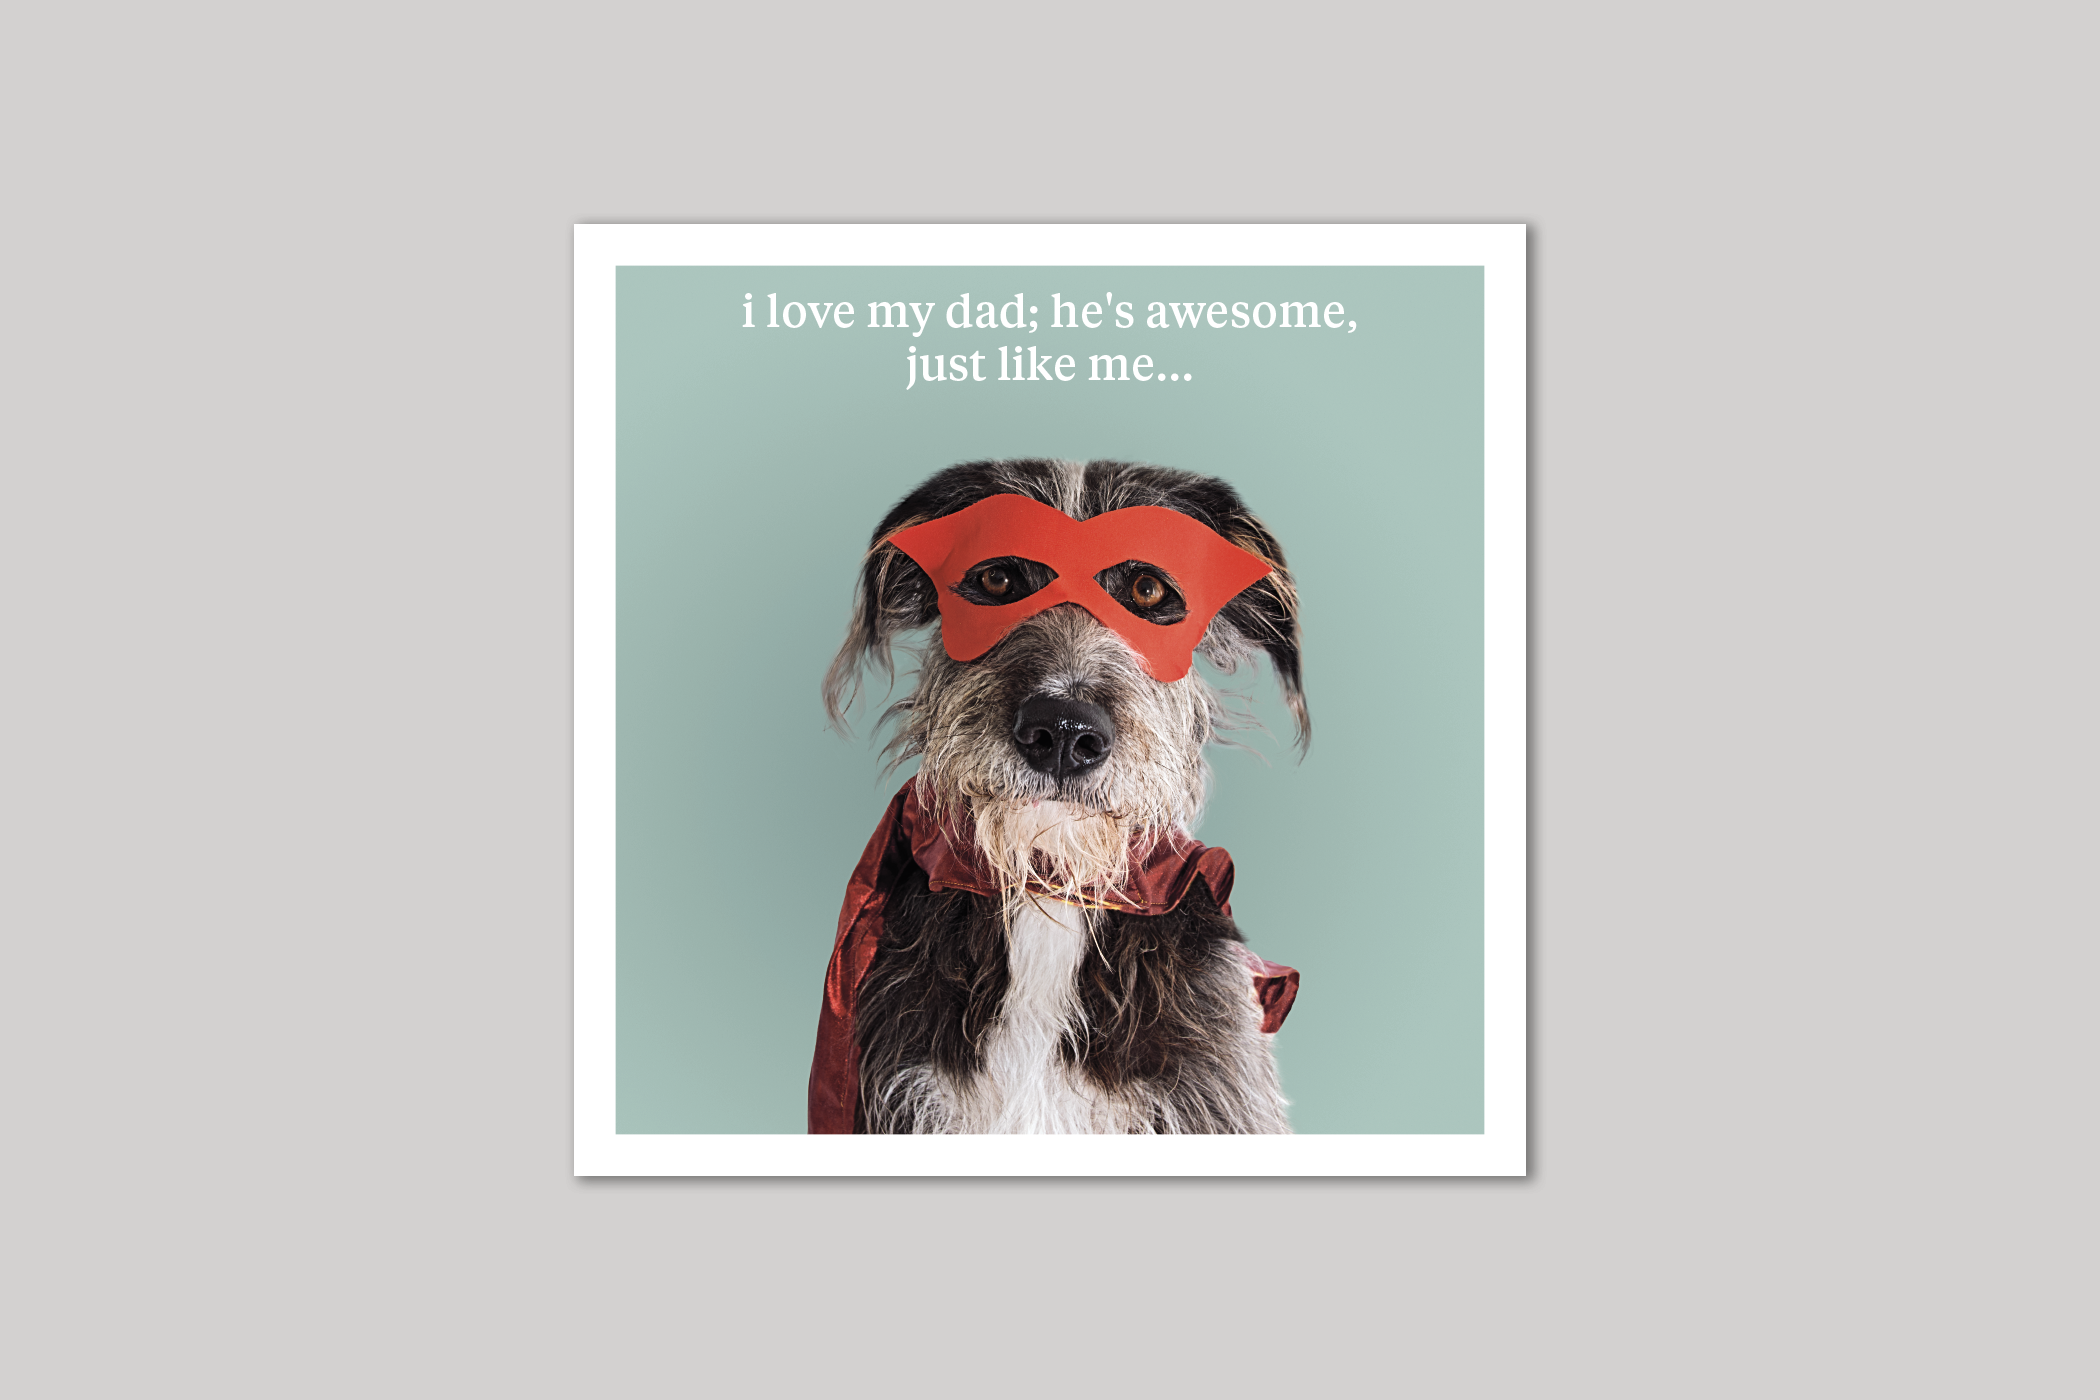 Just Like Me dad card quirky animal portrait from Curious World range of greeting cards by Icon.